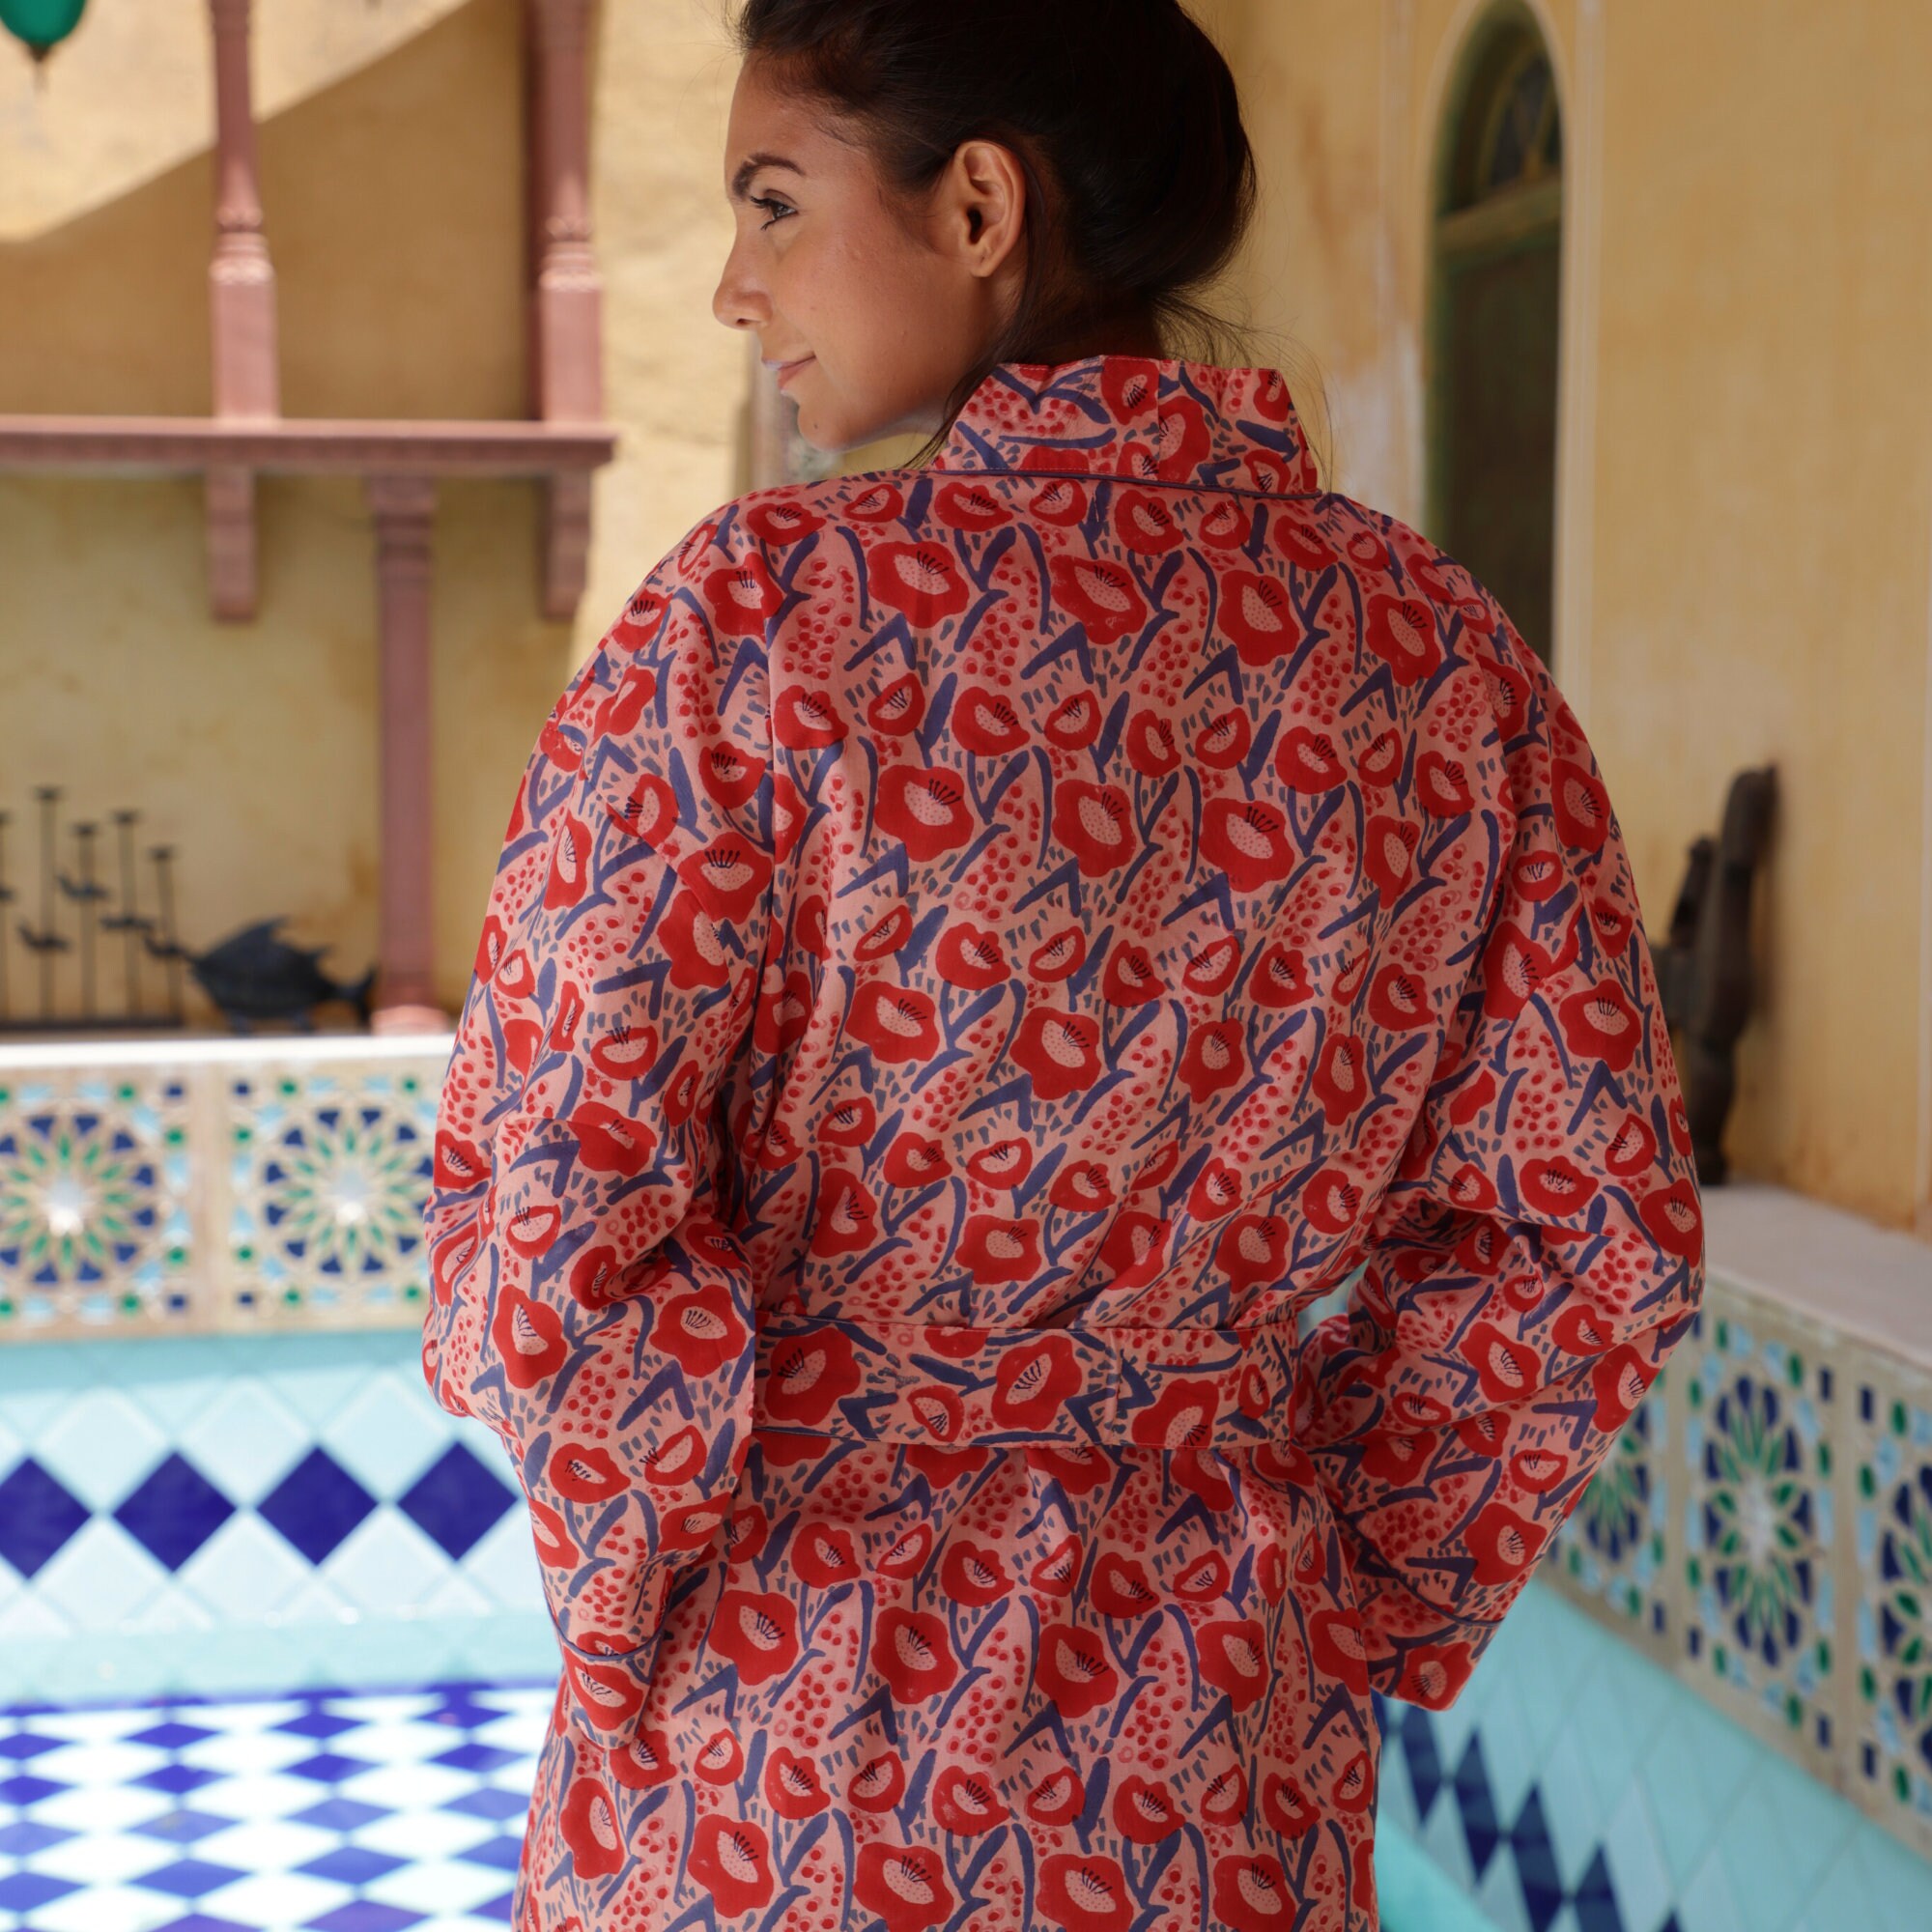 Banyan Floral banyan Dressing gown, Dressing gown of cotton printed with  floral pattern in block print, with raised collar and lapel. Model: Fitted,  with tight-fitting lon - Album alb4485532